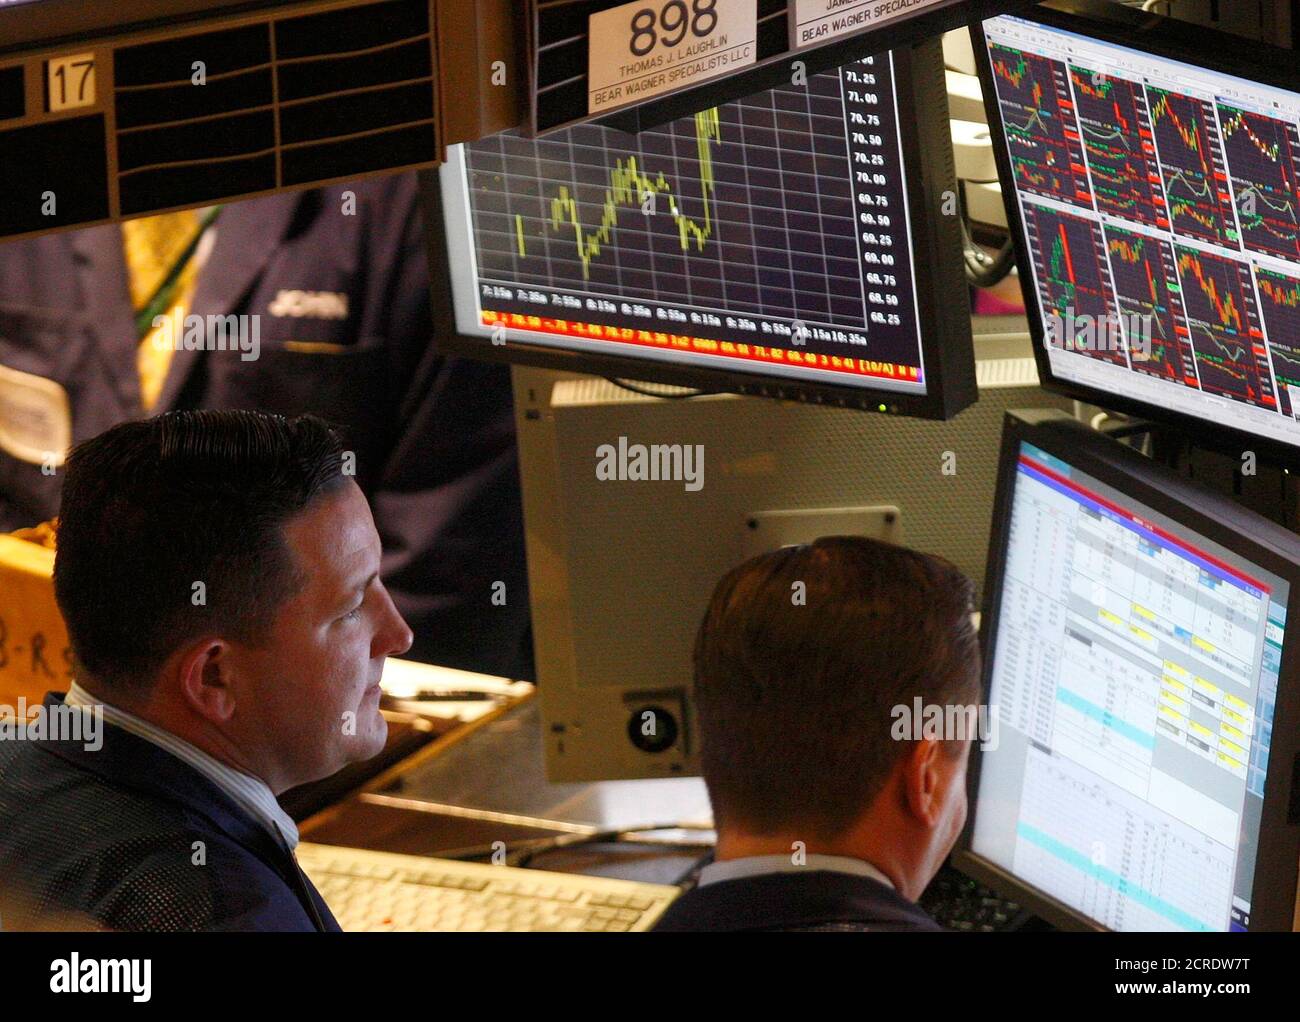 Traders work on the floor of the New York Stock Exchange, November 11, 2008. U.S. stocks tumbled as production cuts at aluminium maker Alcoa, fears of a cash drain at automaker General Motors and signs the Chinese economy is faltering heightened fears of a global economic slump.    REUTERS/Brendan McDermid (UNITED STATES) Stock Photo